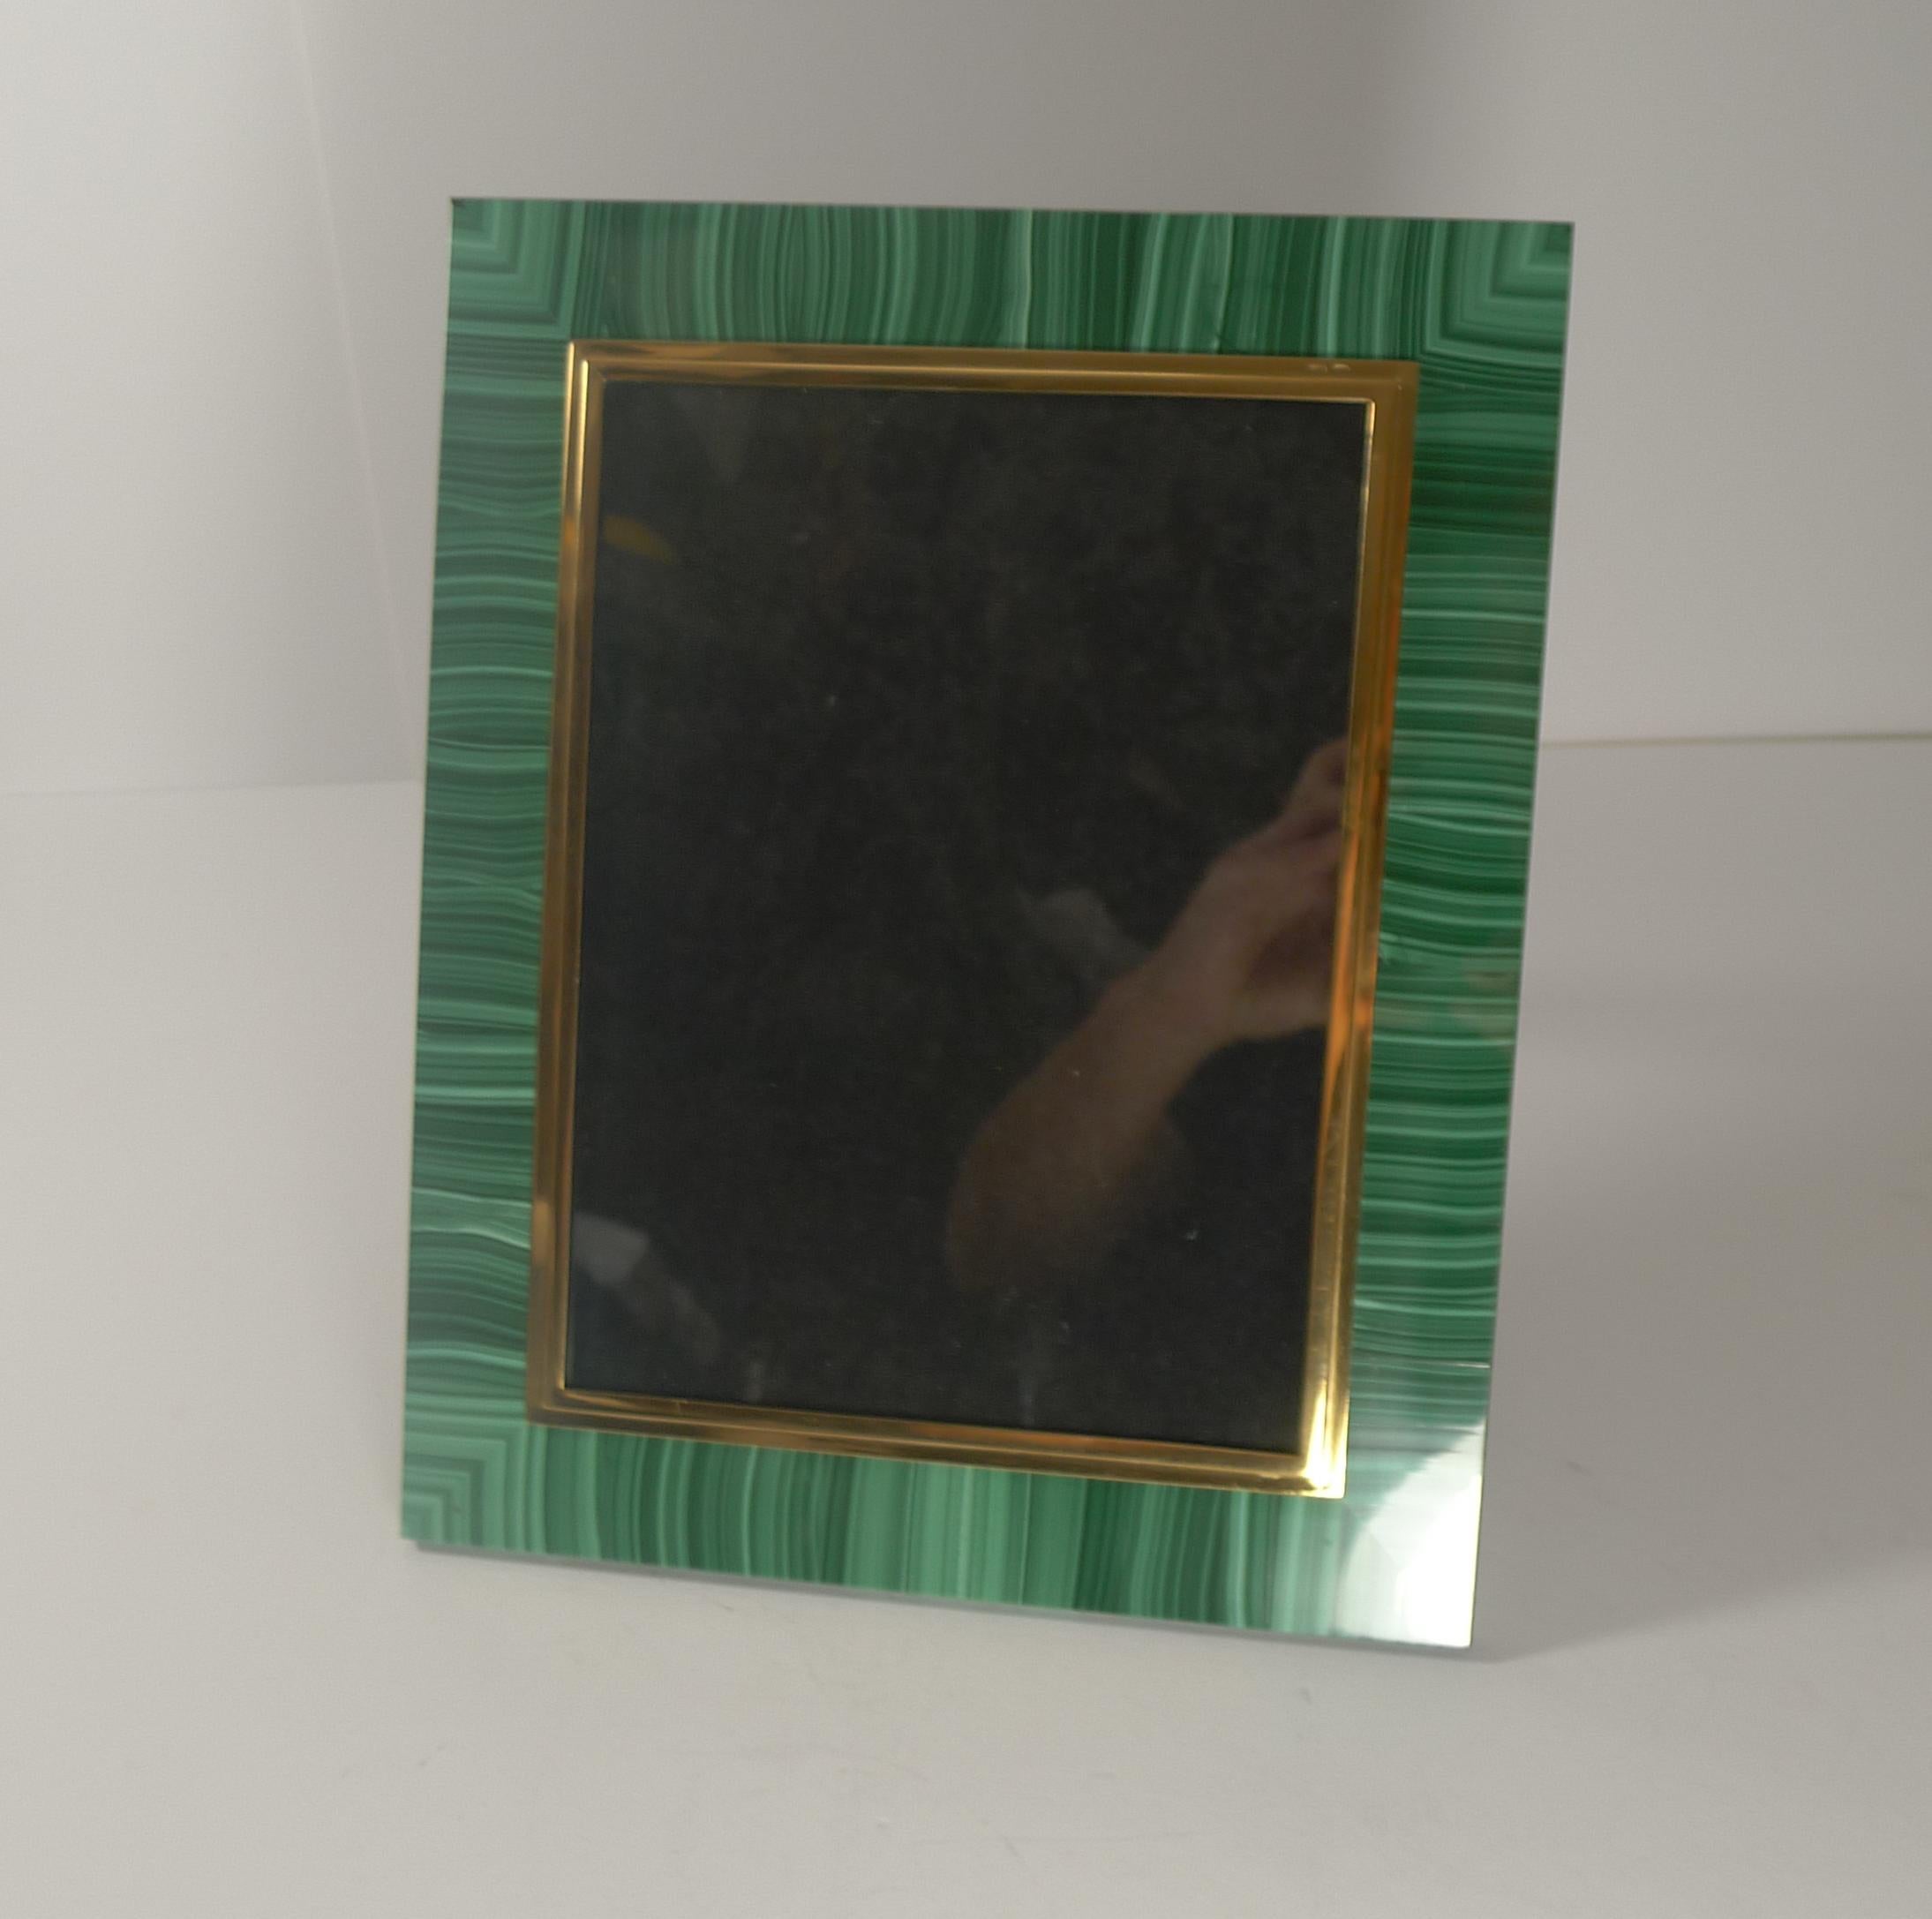 A rare vintage photograph frame and a wonderful large example. Made in Italy c.1950, the vibrant green Malachite stone adds some Hollywood glamour to your interior. The glazed aperture is edged in solid 800 grade silver and smothered in gold.

The